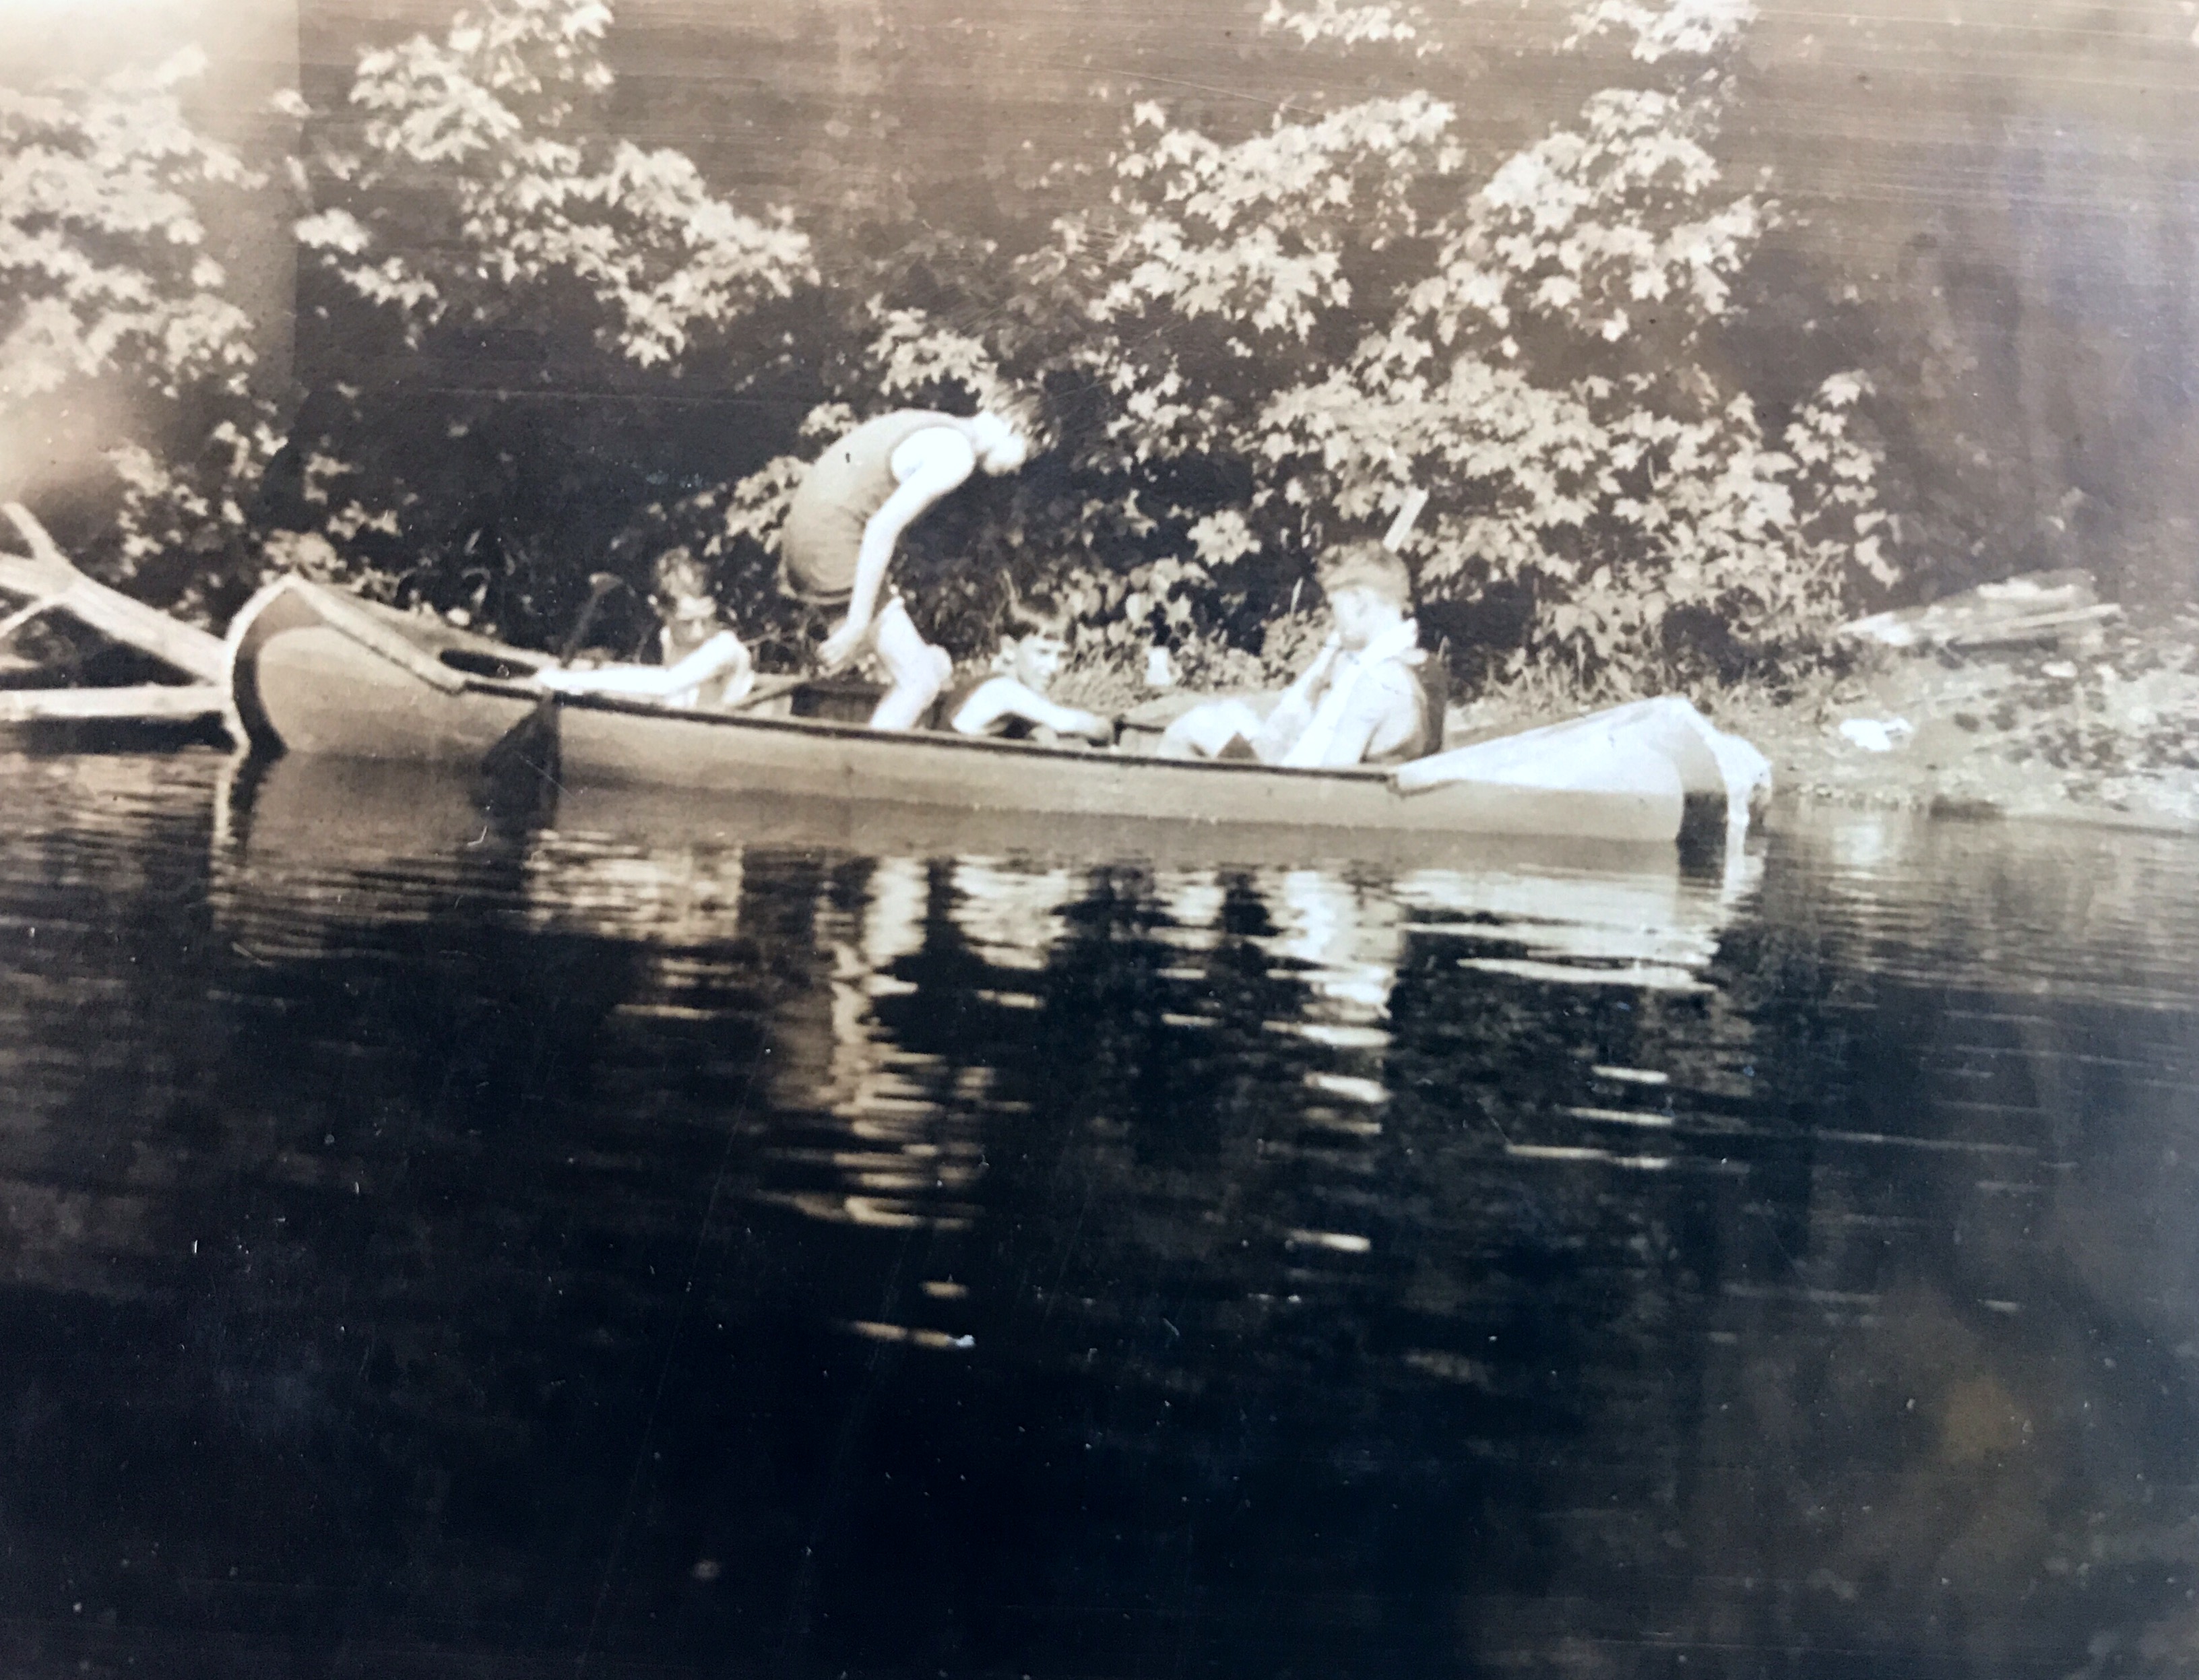 Possibly taken in Haddam Ct 1920’s